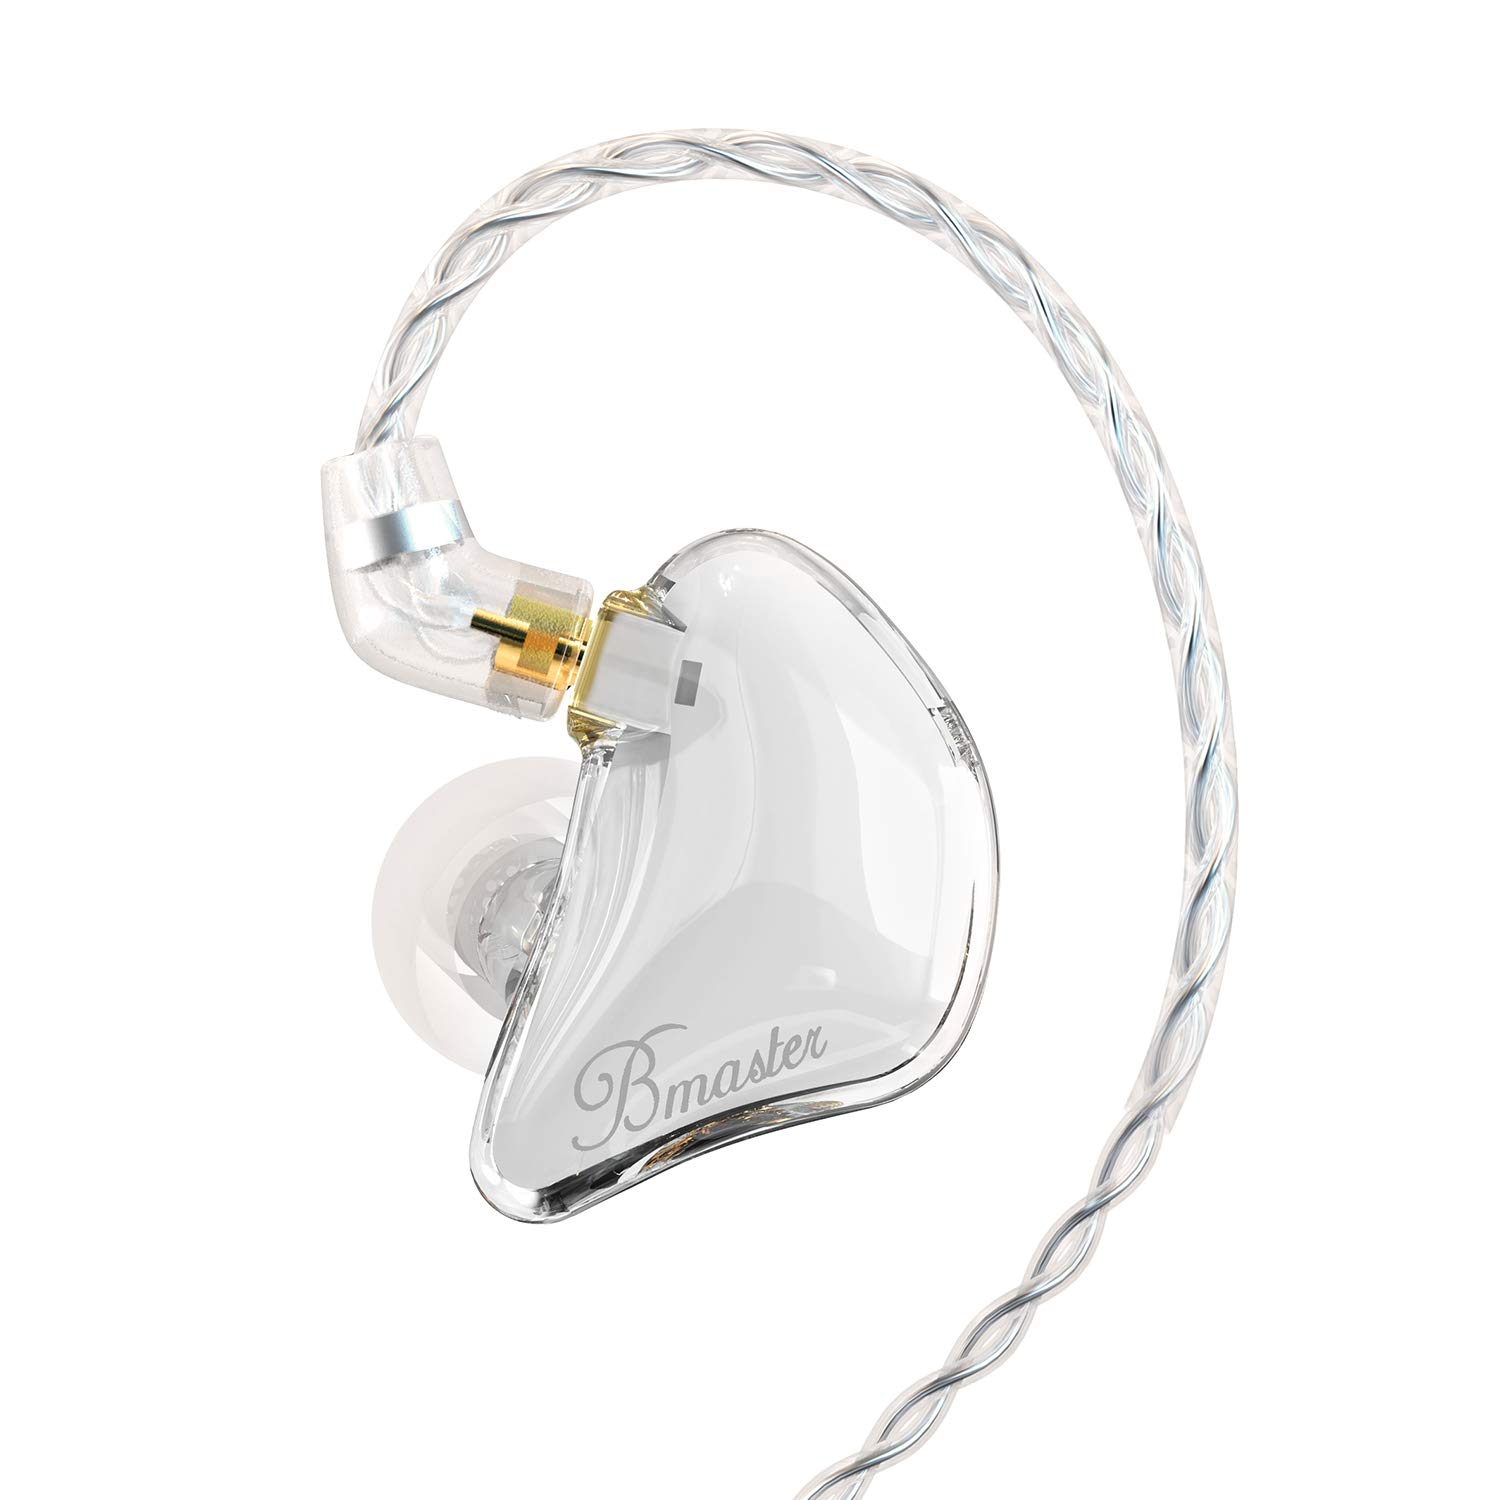 BASN Bmaster Triple Drivers in Ear Monitor Headphone with Two Detachable Cables Fit in Ear Suitable for Audio Engineer, Musician (White)